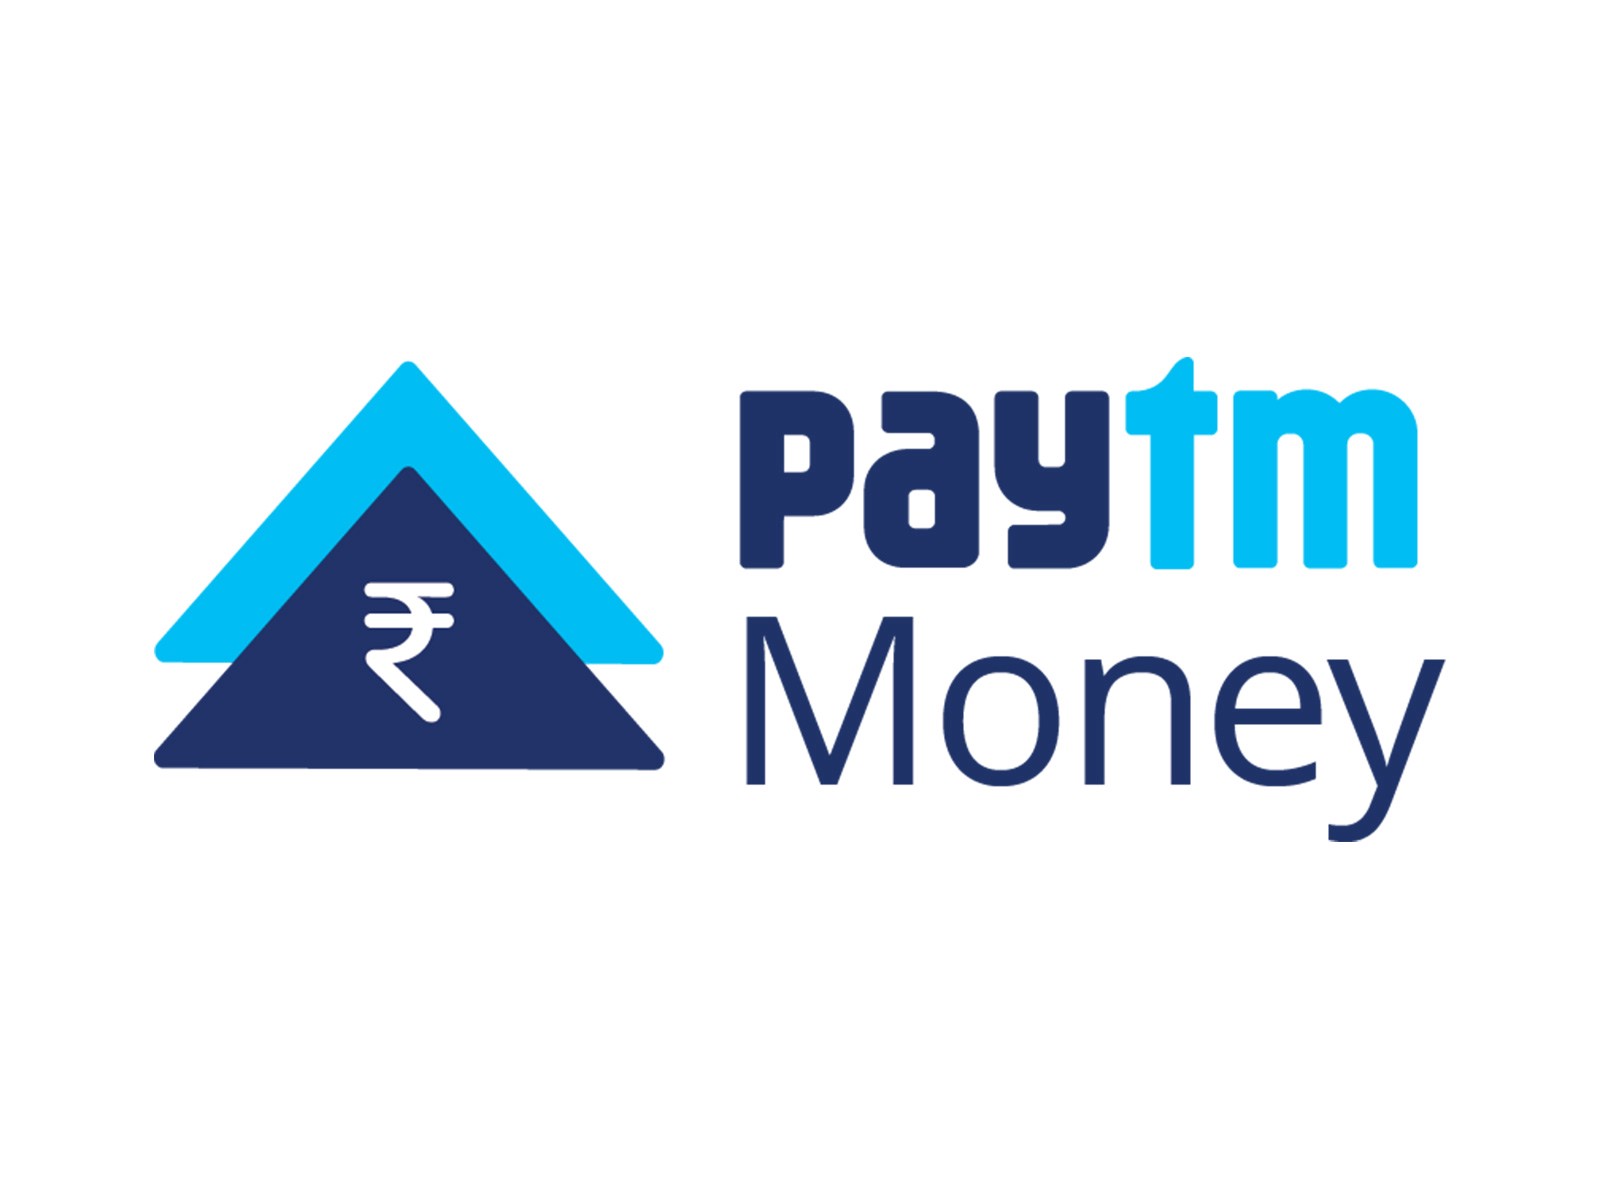 Paytm Money to Commence Operations in Next Few Weeks